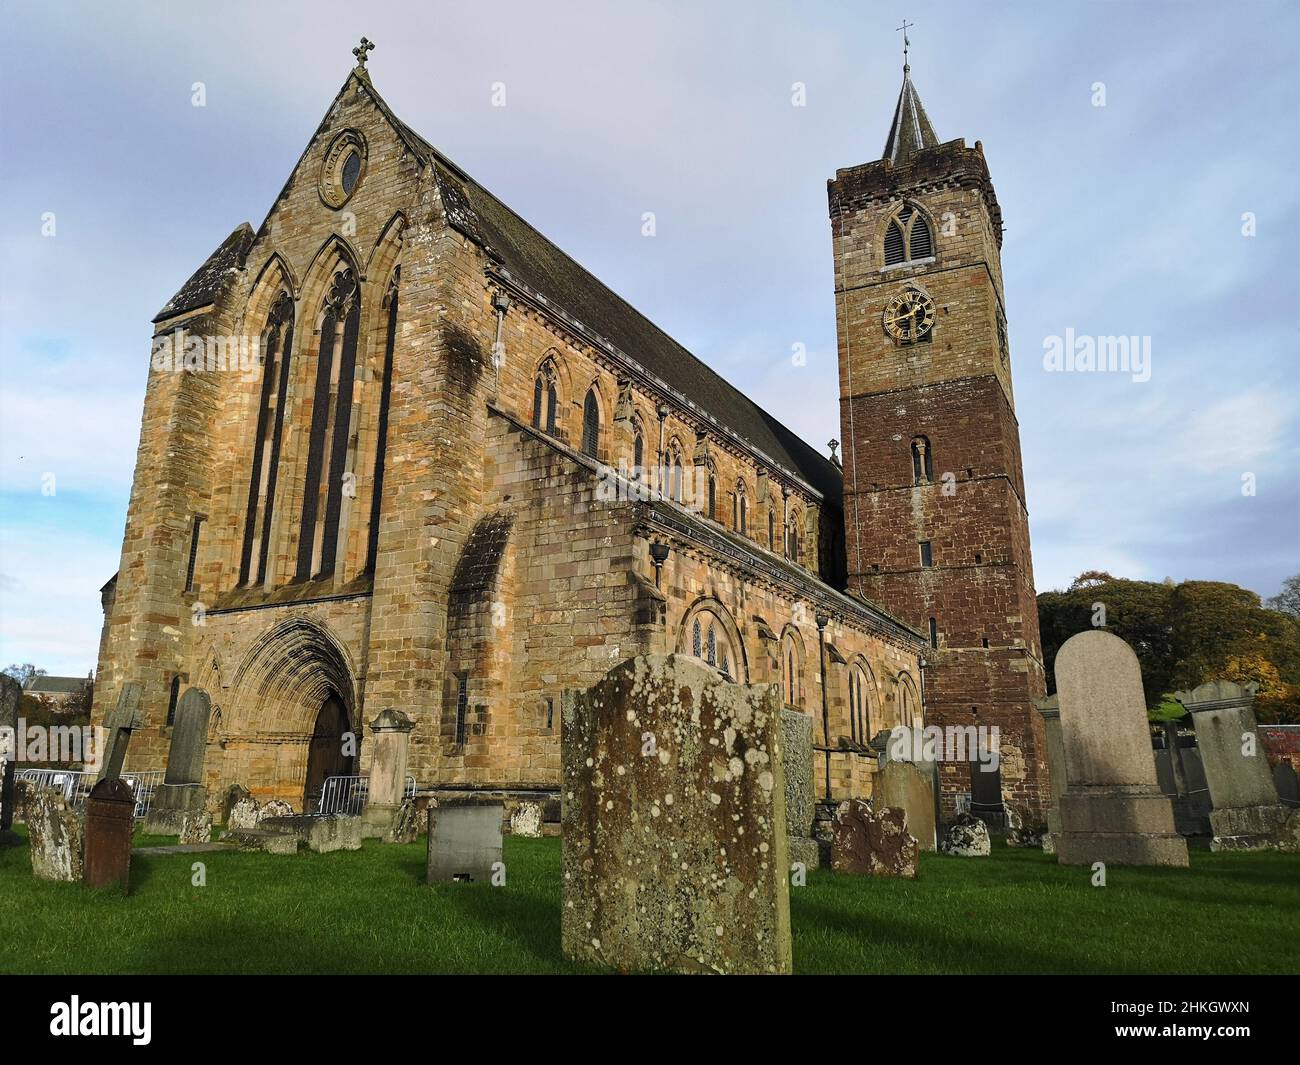 An exterior view of the large medieval cathedral building in the village of Dunblane, Scotland. Stock Photo